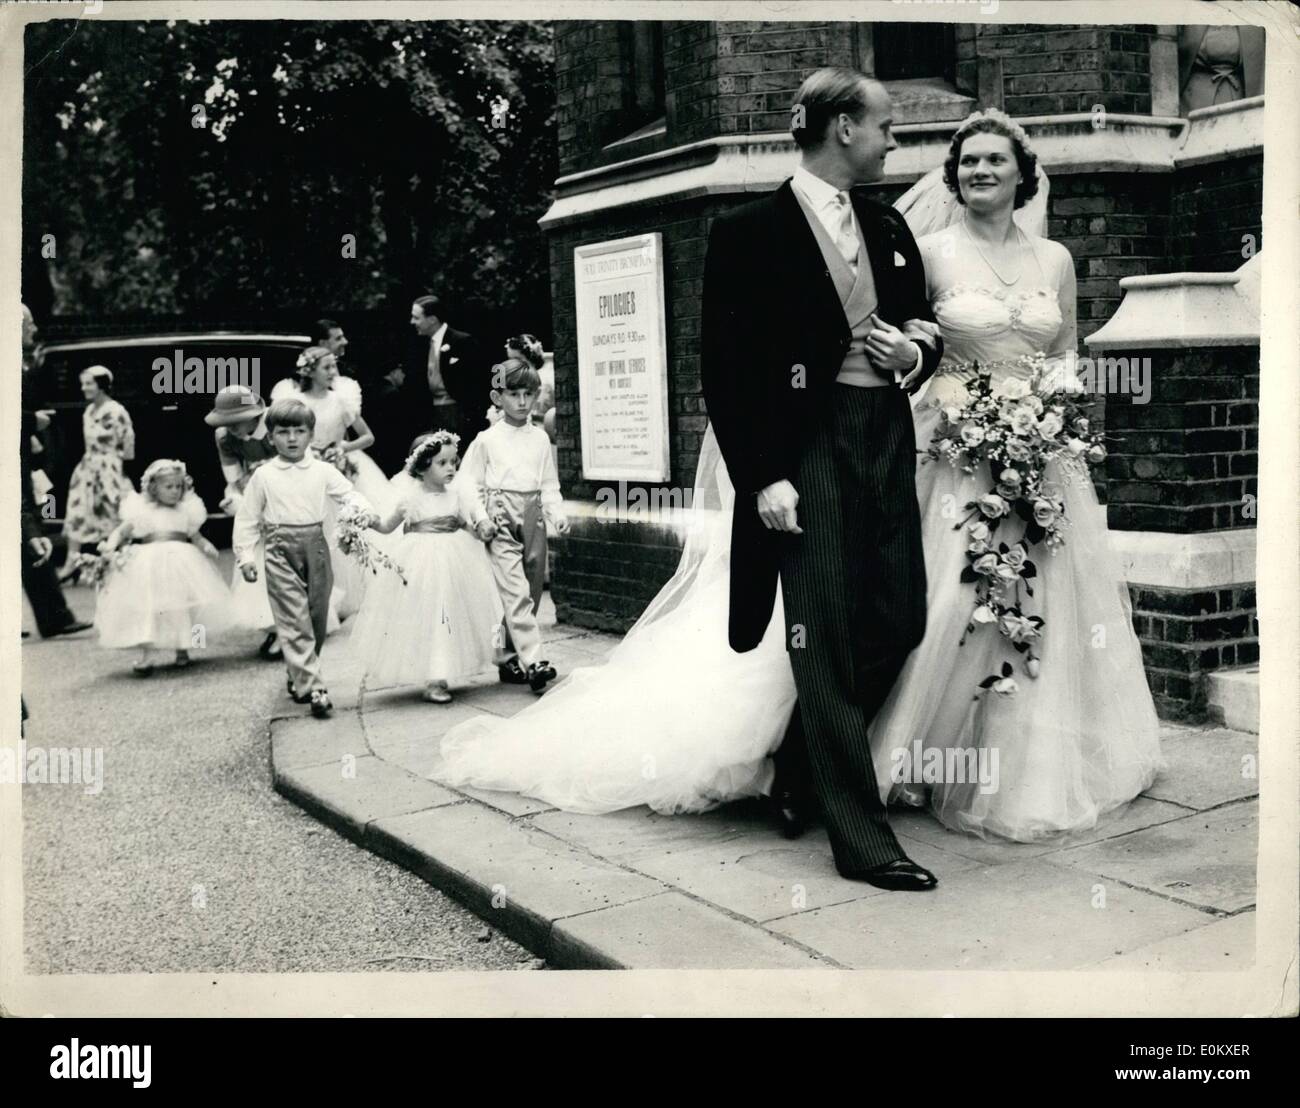 Jun. 06, 1952 - Lord Lymington Weds: The wedding took place today at Holy Trinity, Brompton, between 29 year old Viscount Lymington, son of the Earl of Portsmouth, of Kitale, Kenya, and Mrs. John How, of Arizona, U.S.A. and Miss Maureen Stanley, only daughter of Lt.Col. and Mrs. K.B. Stanley, of Kingston House, Princes Gat, London. Photo shows The bride and groom followed by the rtinue of bridesmaids and pges, after the ceremony. Stock Photo